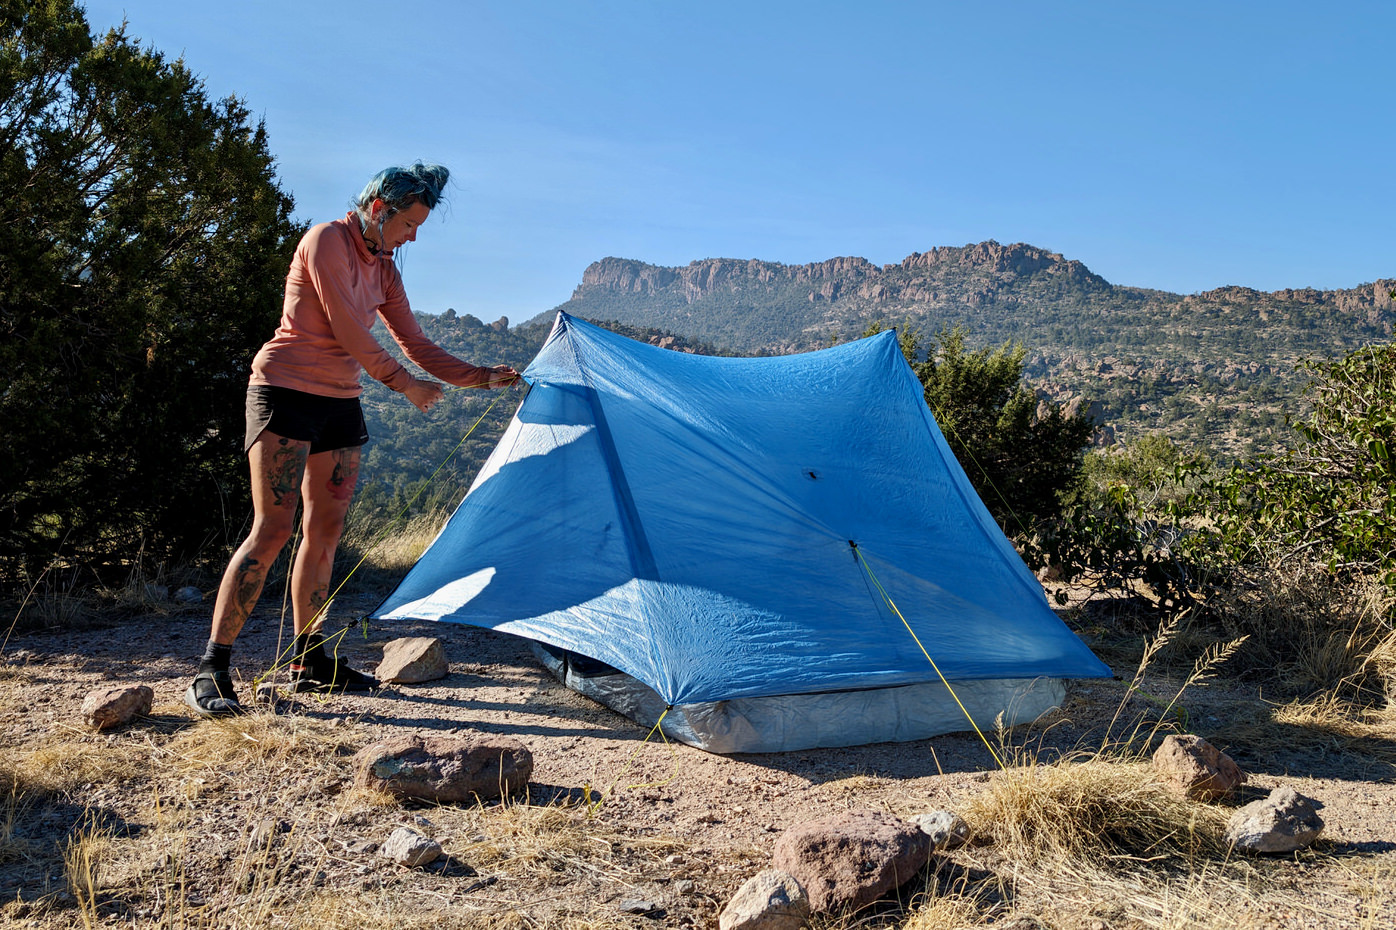 A backpacker adjusting the left outside guyline of the Zpacks Duplex Zip tent in Arizona with mountains in the background and blue sky overhead